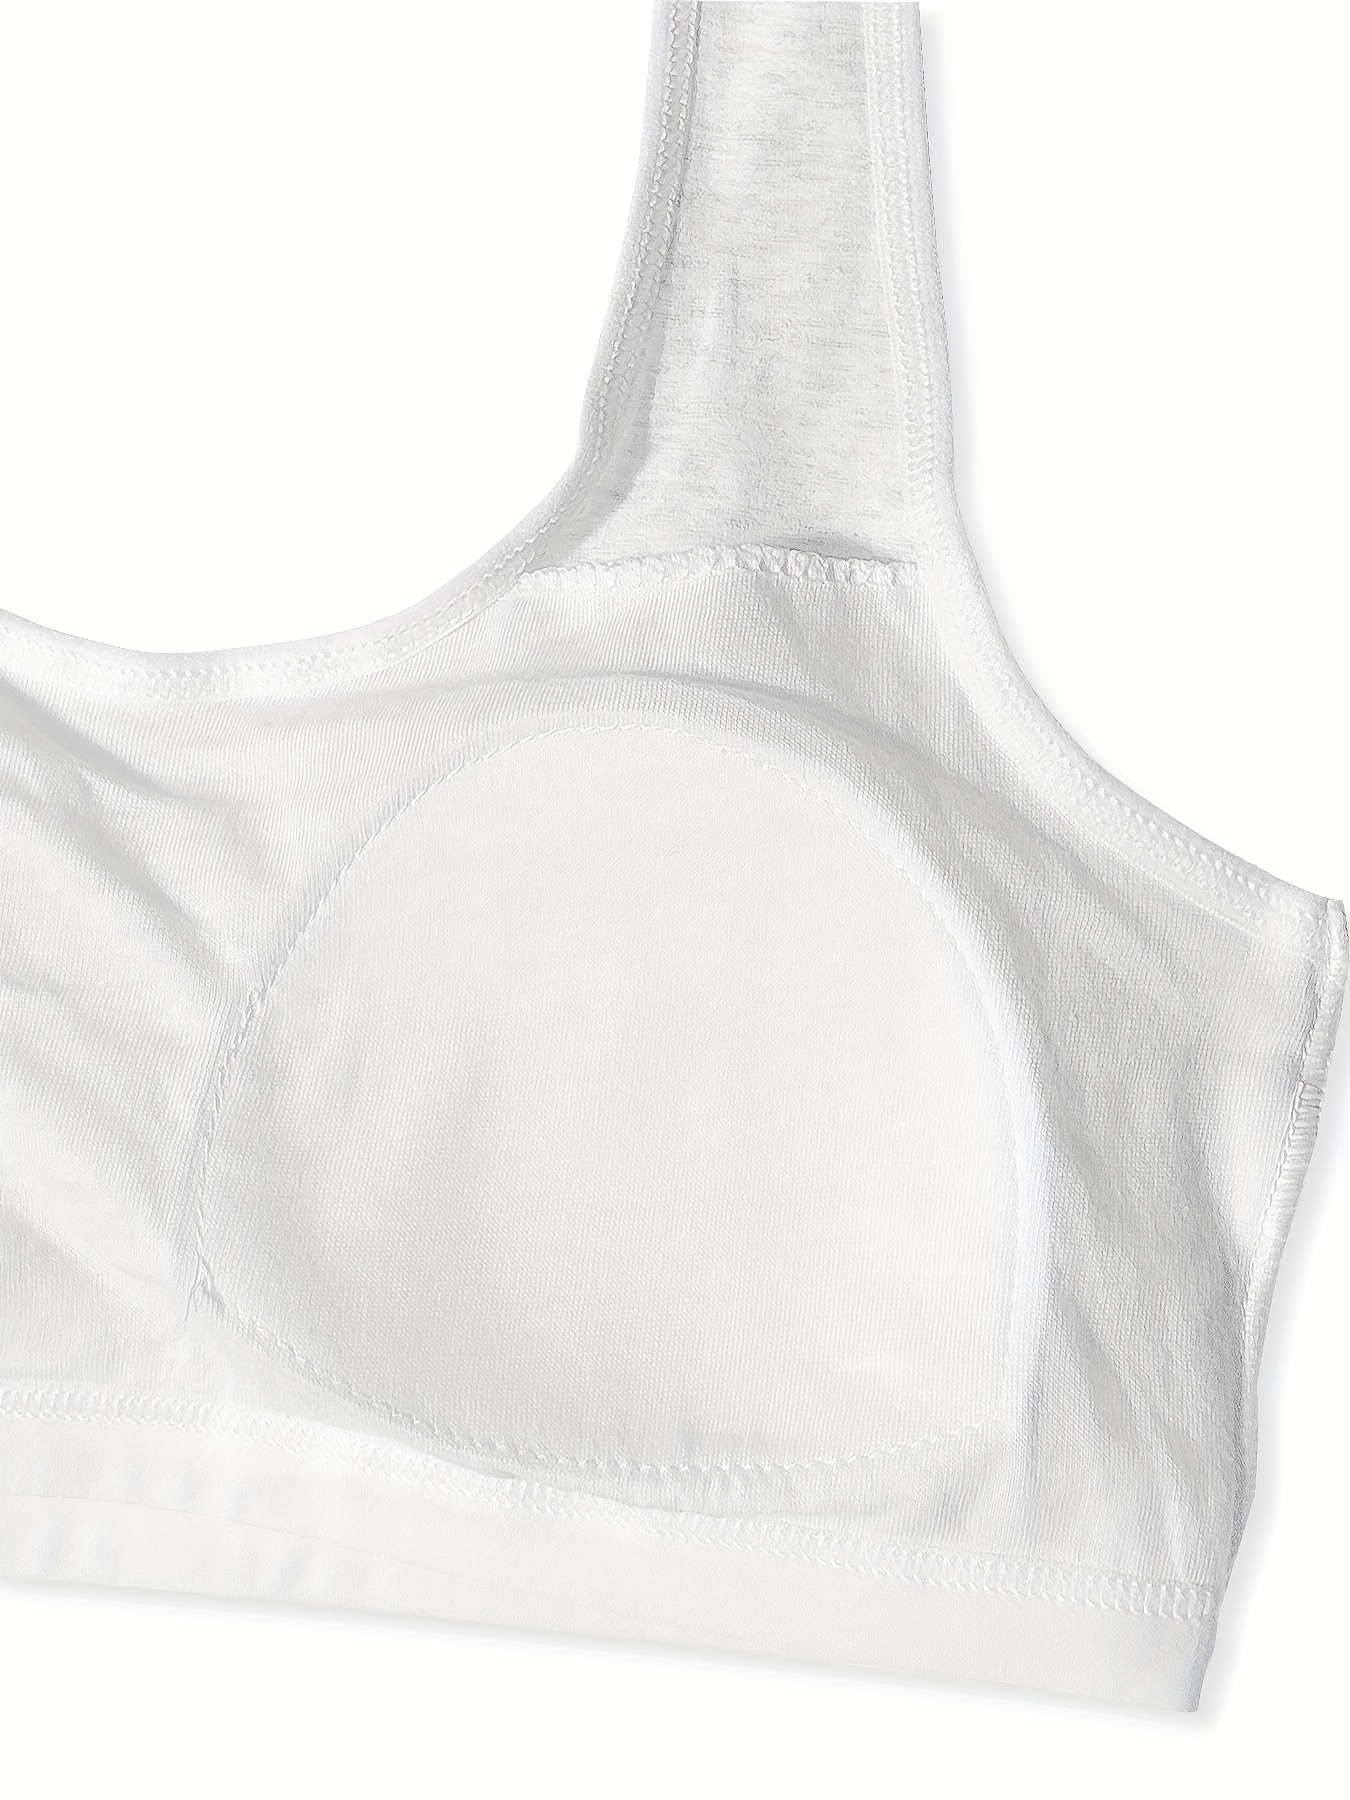 Teen Girl's Cotton Comfort Seamless Cami Bra with Removable Padding